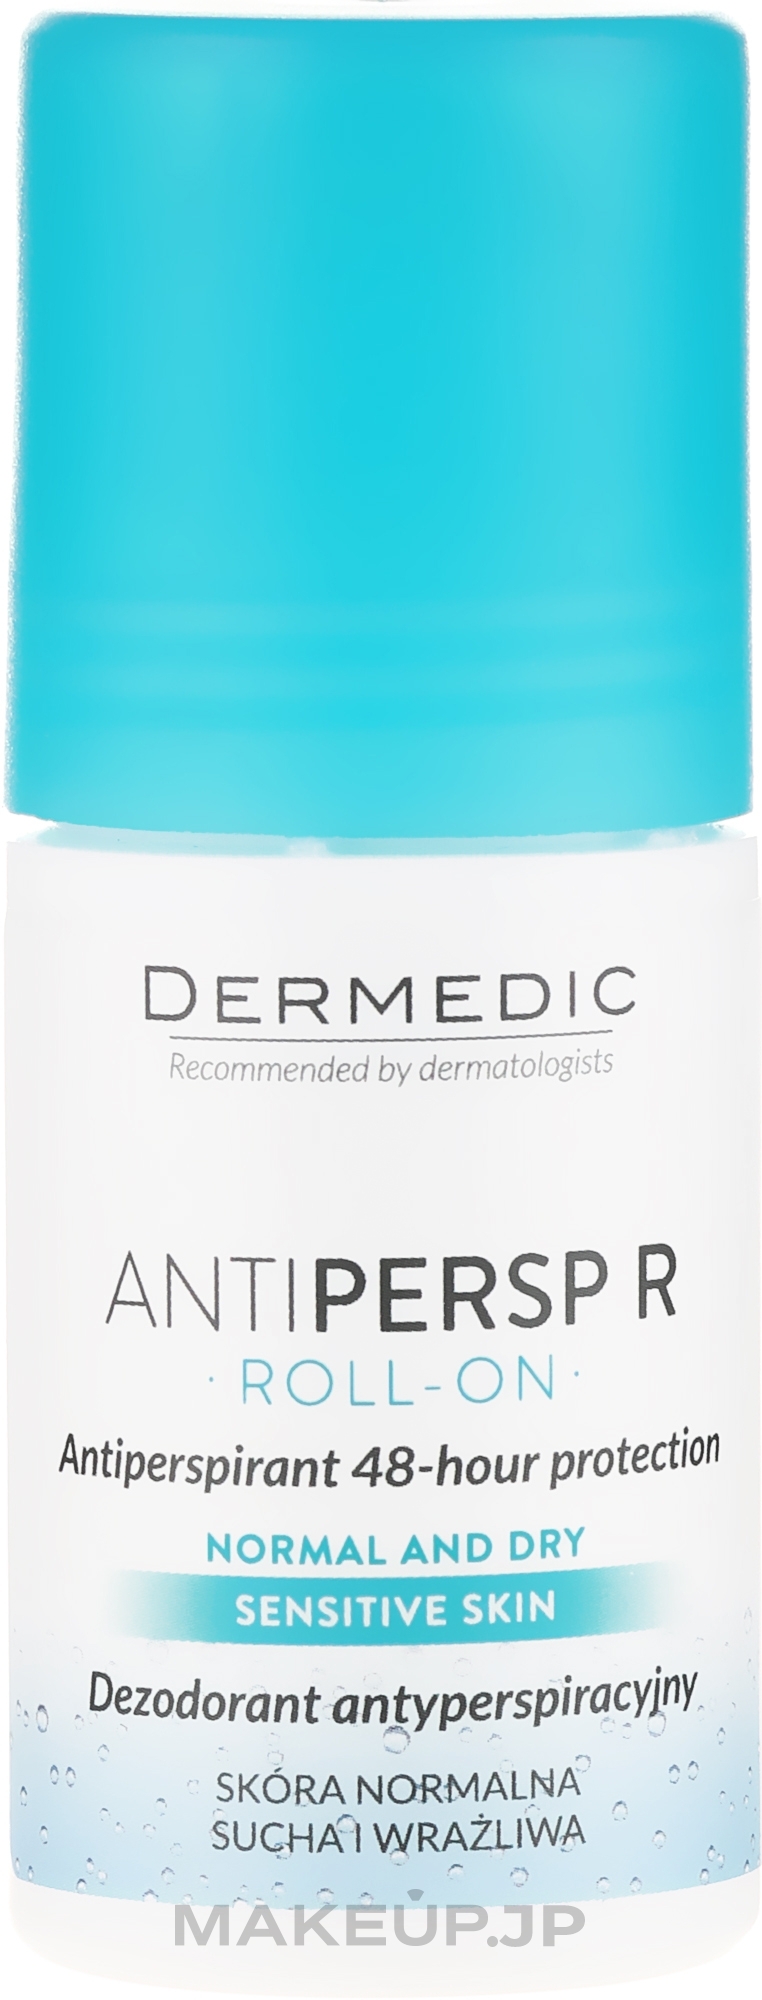 Roll-on Antiperspirant with a Neutral Scent - Dermedic Antipersp R  — photo 60 g